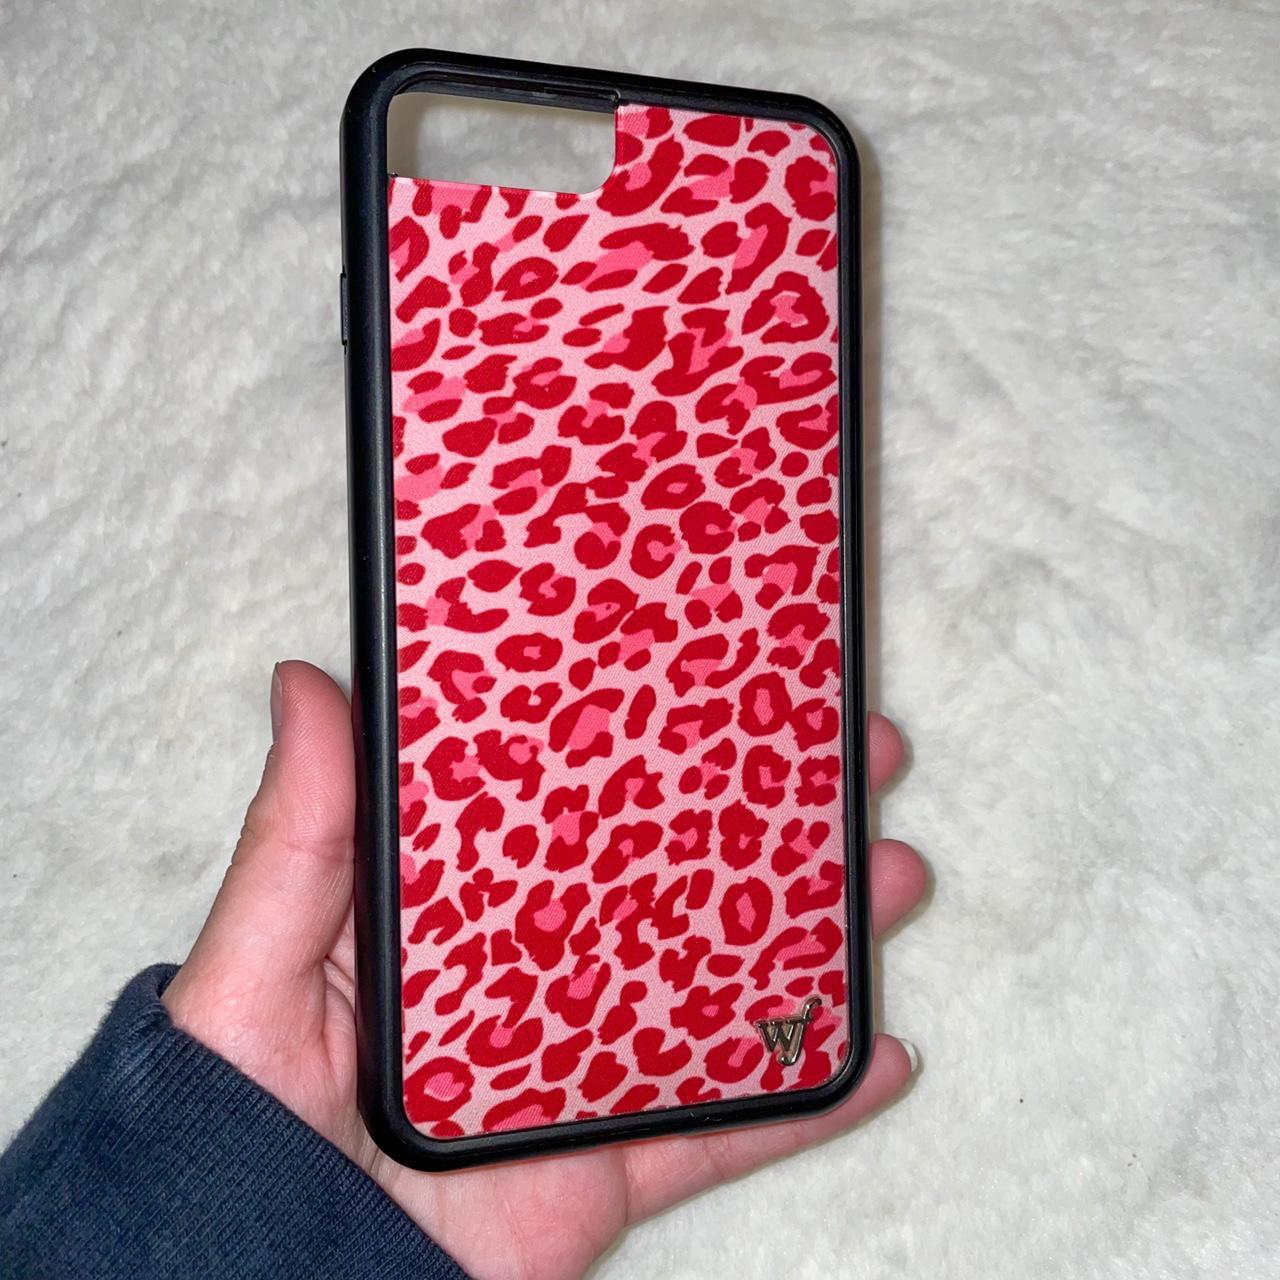 Product Image 2 - Wildflower pink cheetah phone case🌼

Adorable